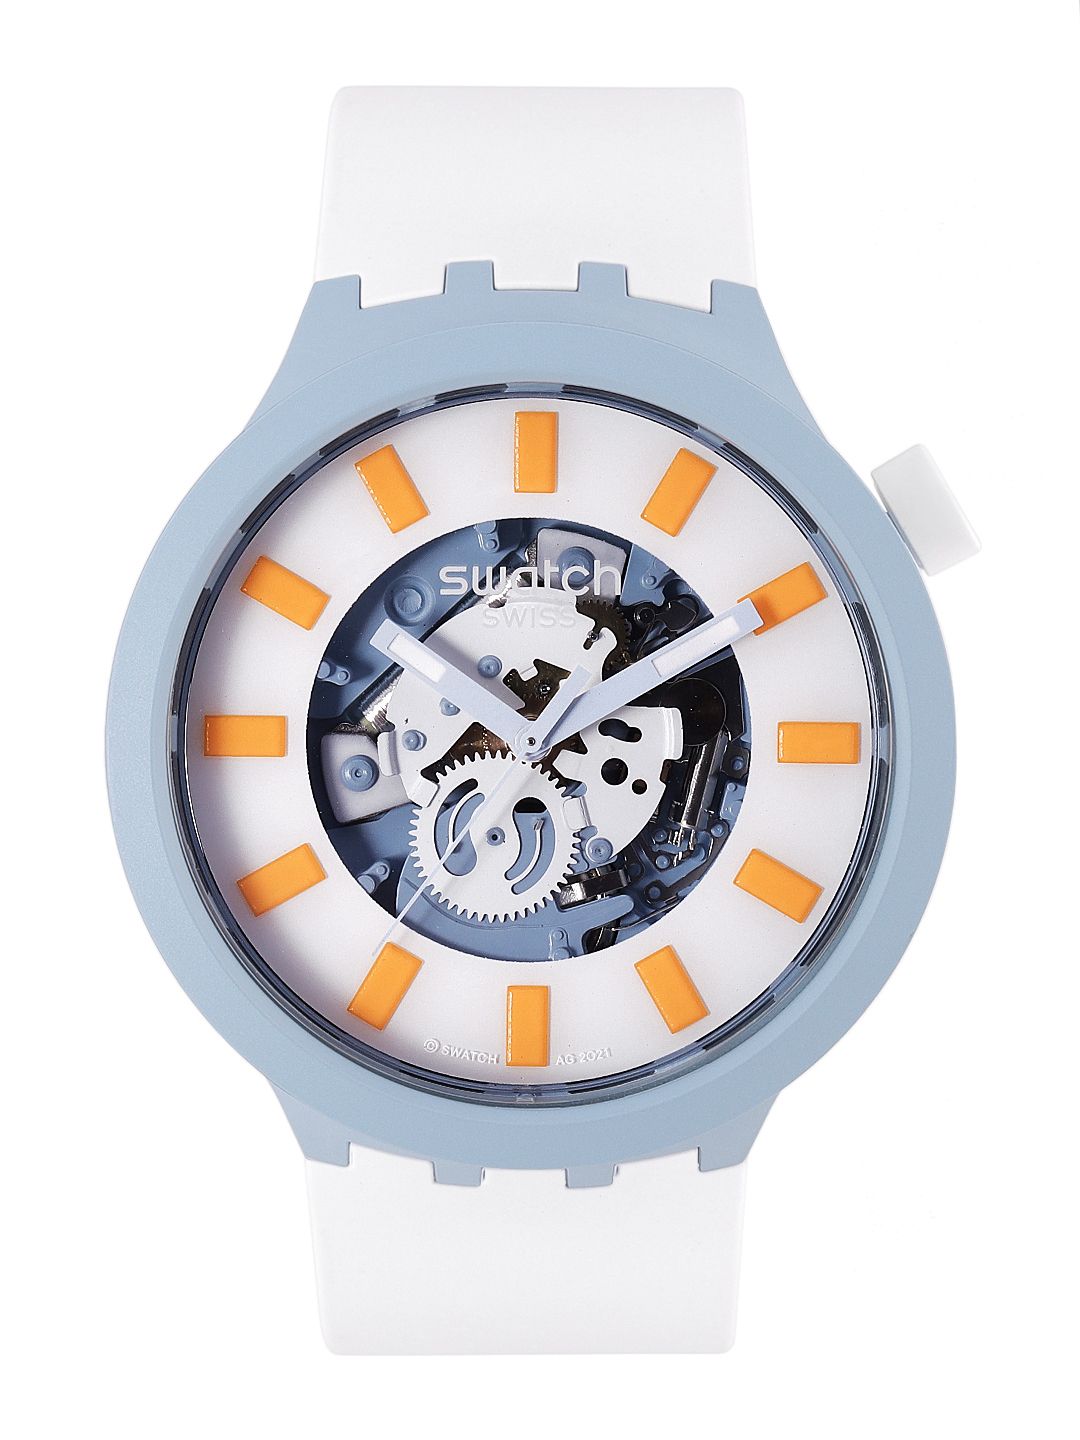 Swatch Unisex White Swiss Made Skeleton Water Resistant Analogue Watch SB03N101 Price in India